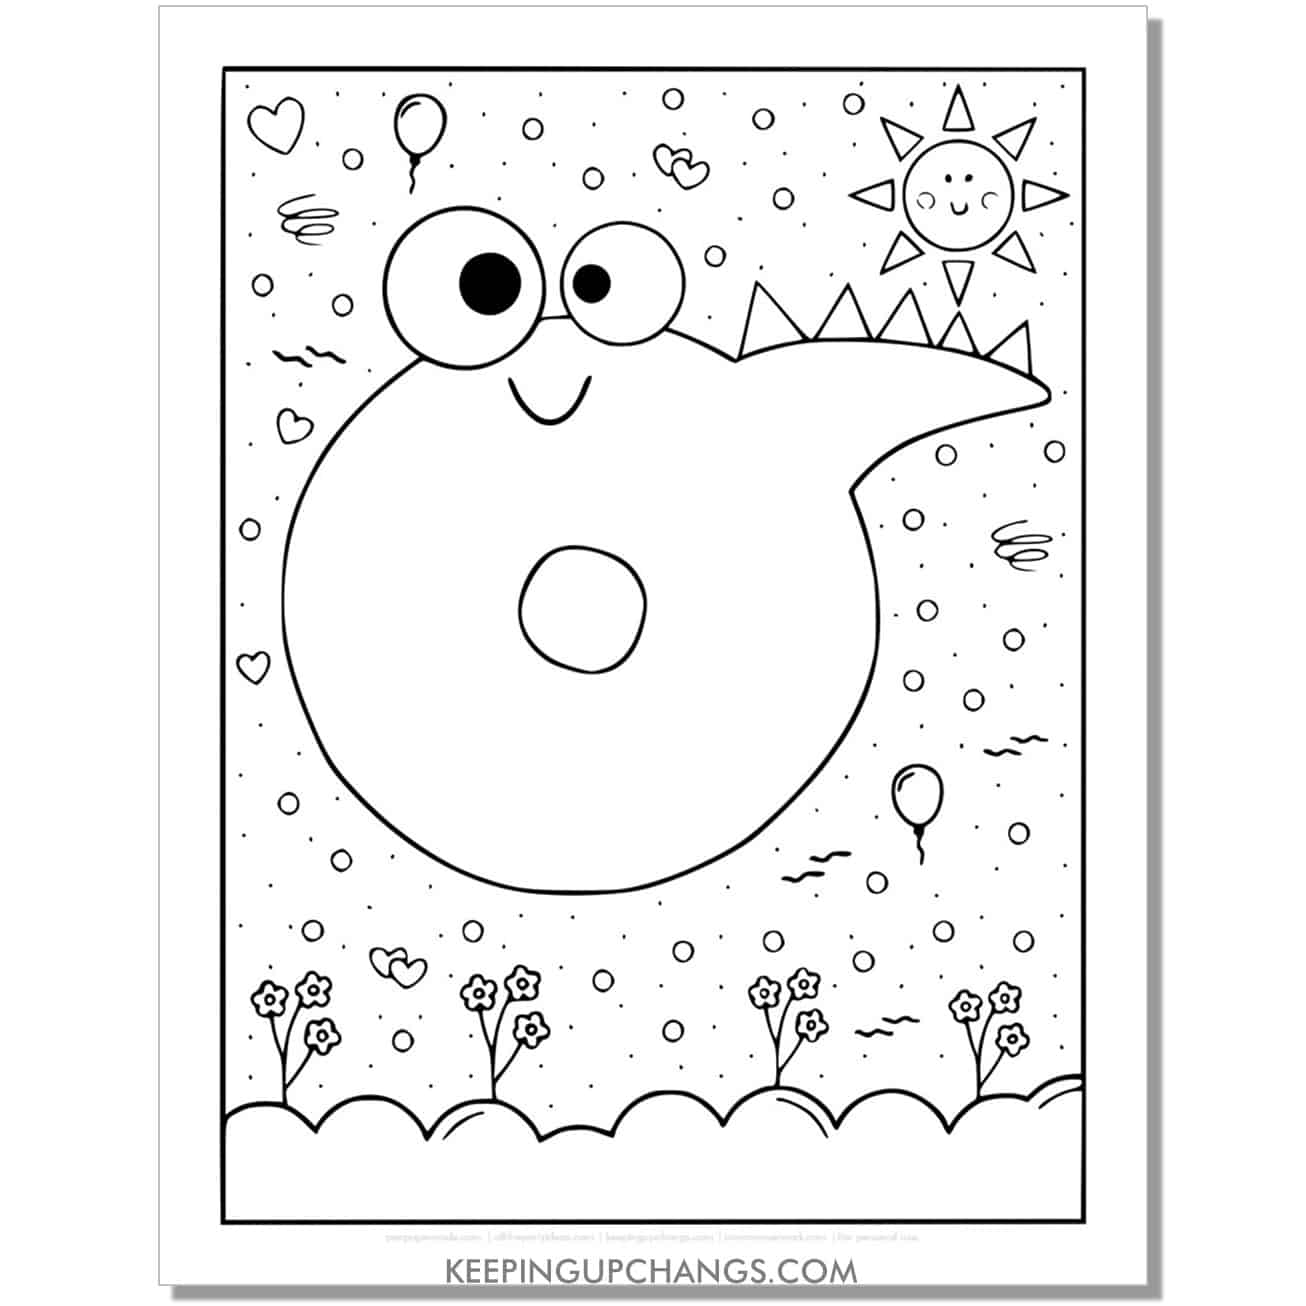 cute o coloring page with monster dinosaur letter.